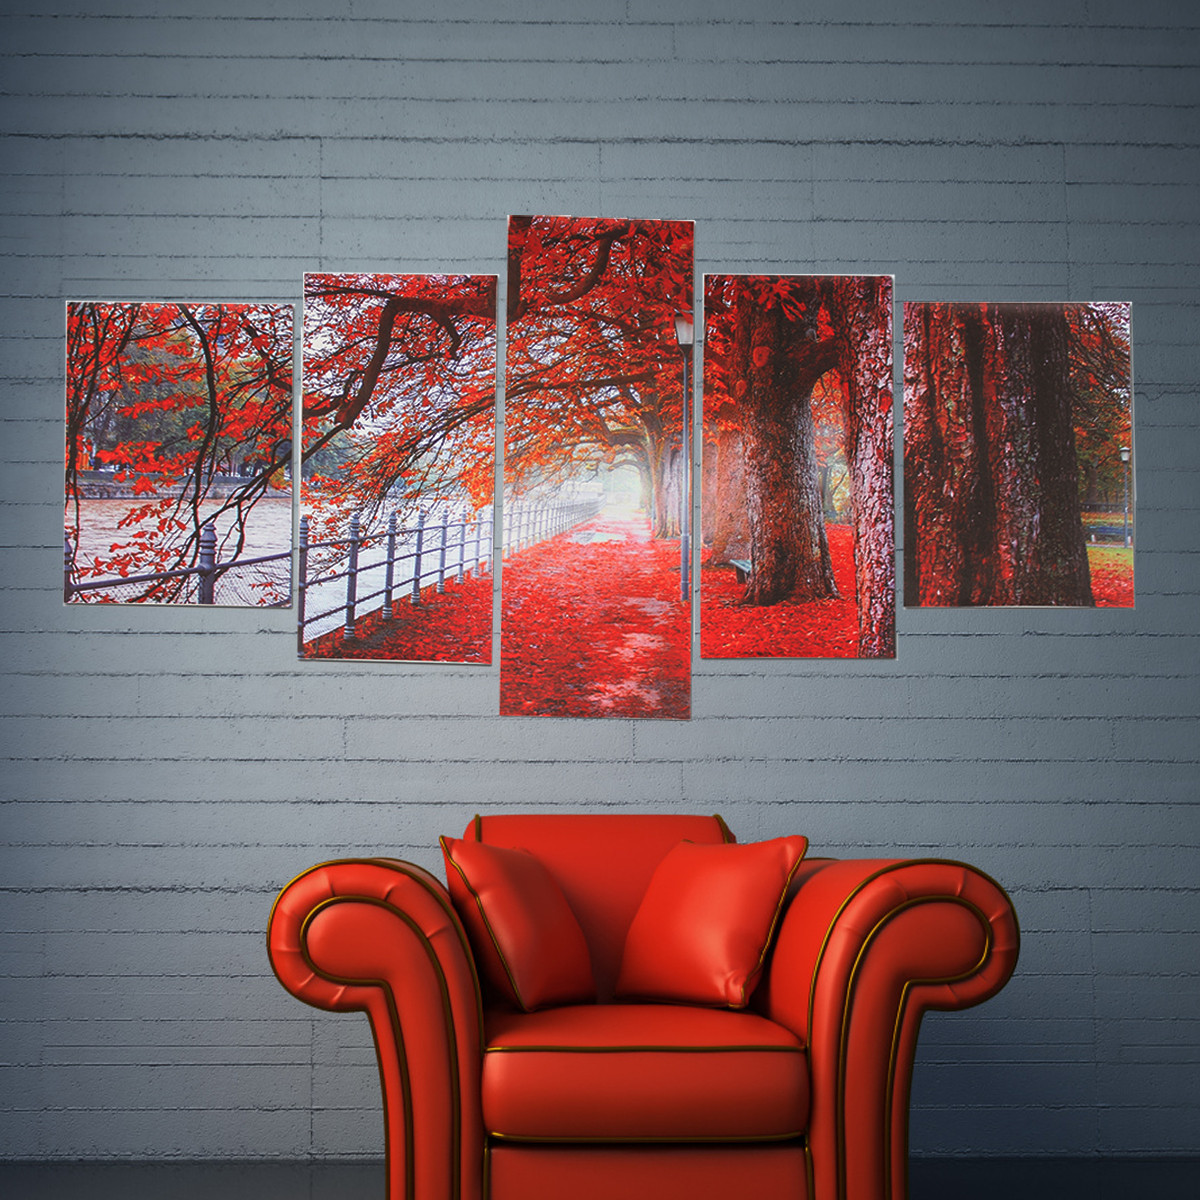 Find 5Pcs Red Falling Leaves Canvas Painting Autumn Tree Wall Decorative Print Art Pictures Unframed Wall Hanging Home Office Decorations for Sale on Gipsybee.com with cryptocurrencies